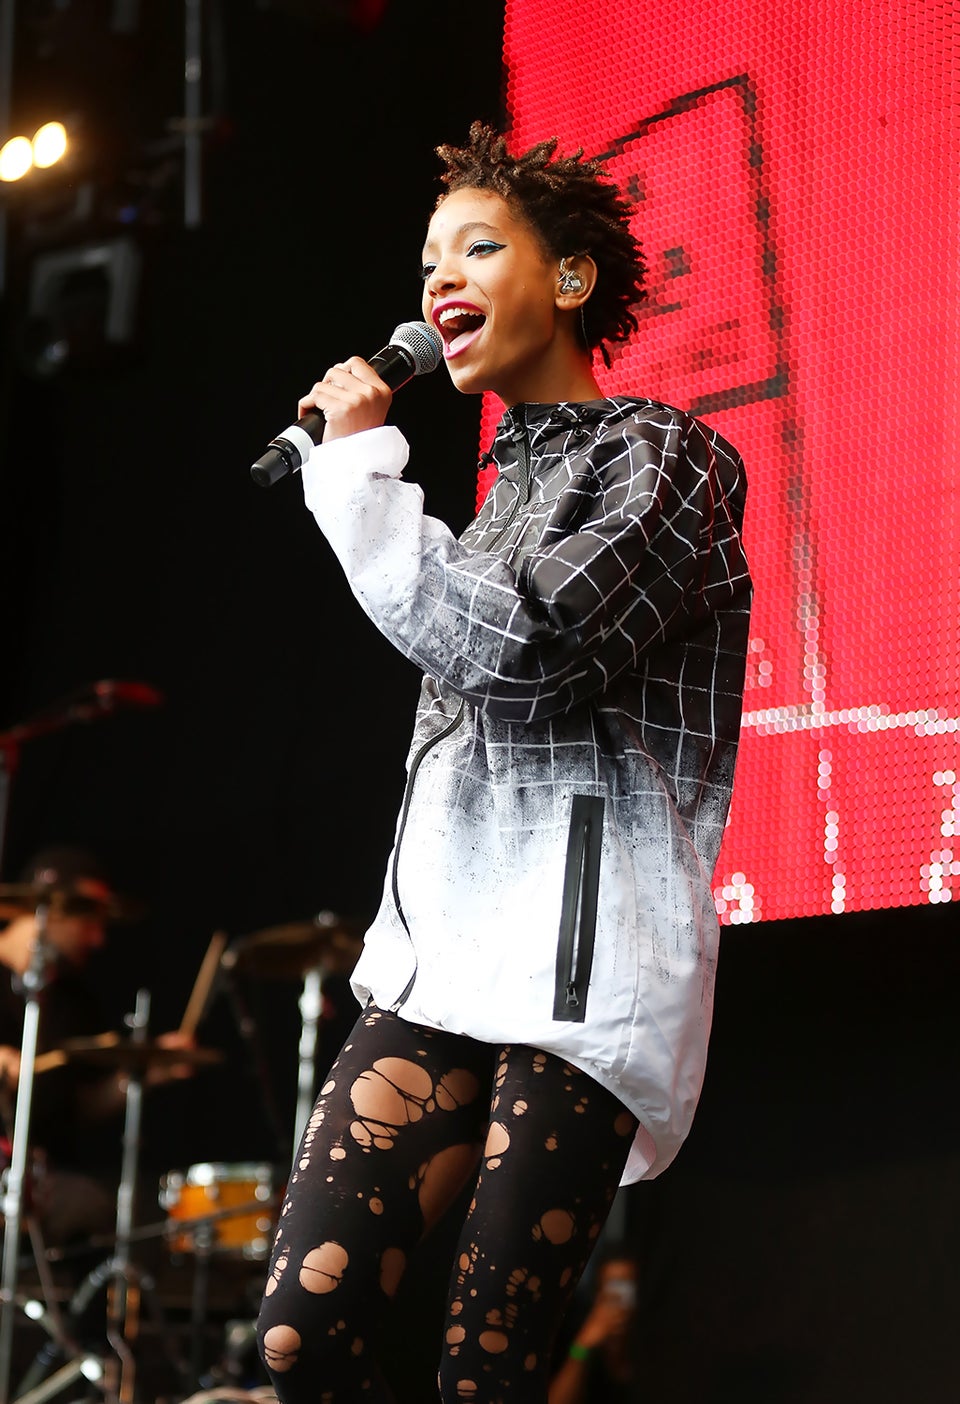 Willow Smith Promises that Another Album Is Coming Soon